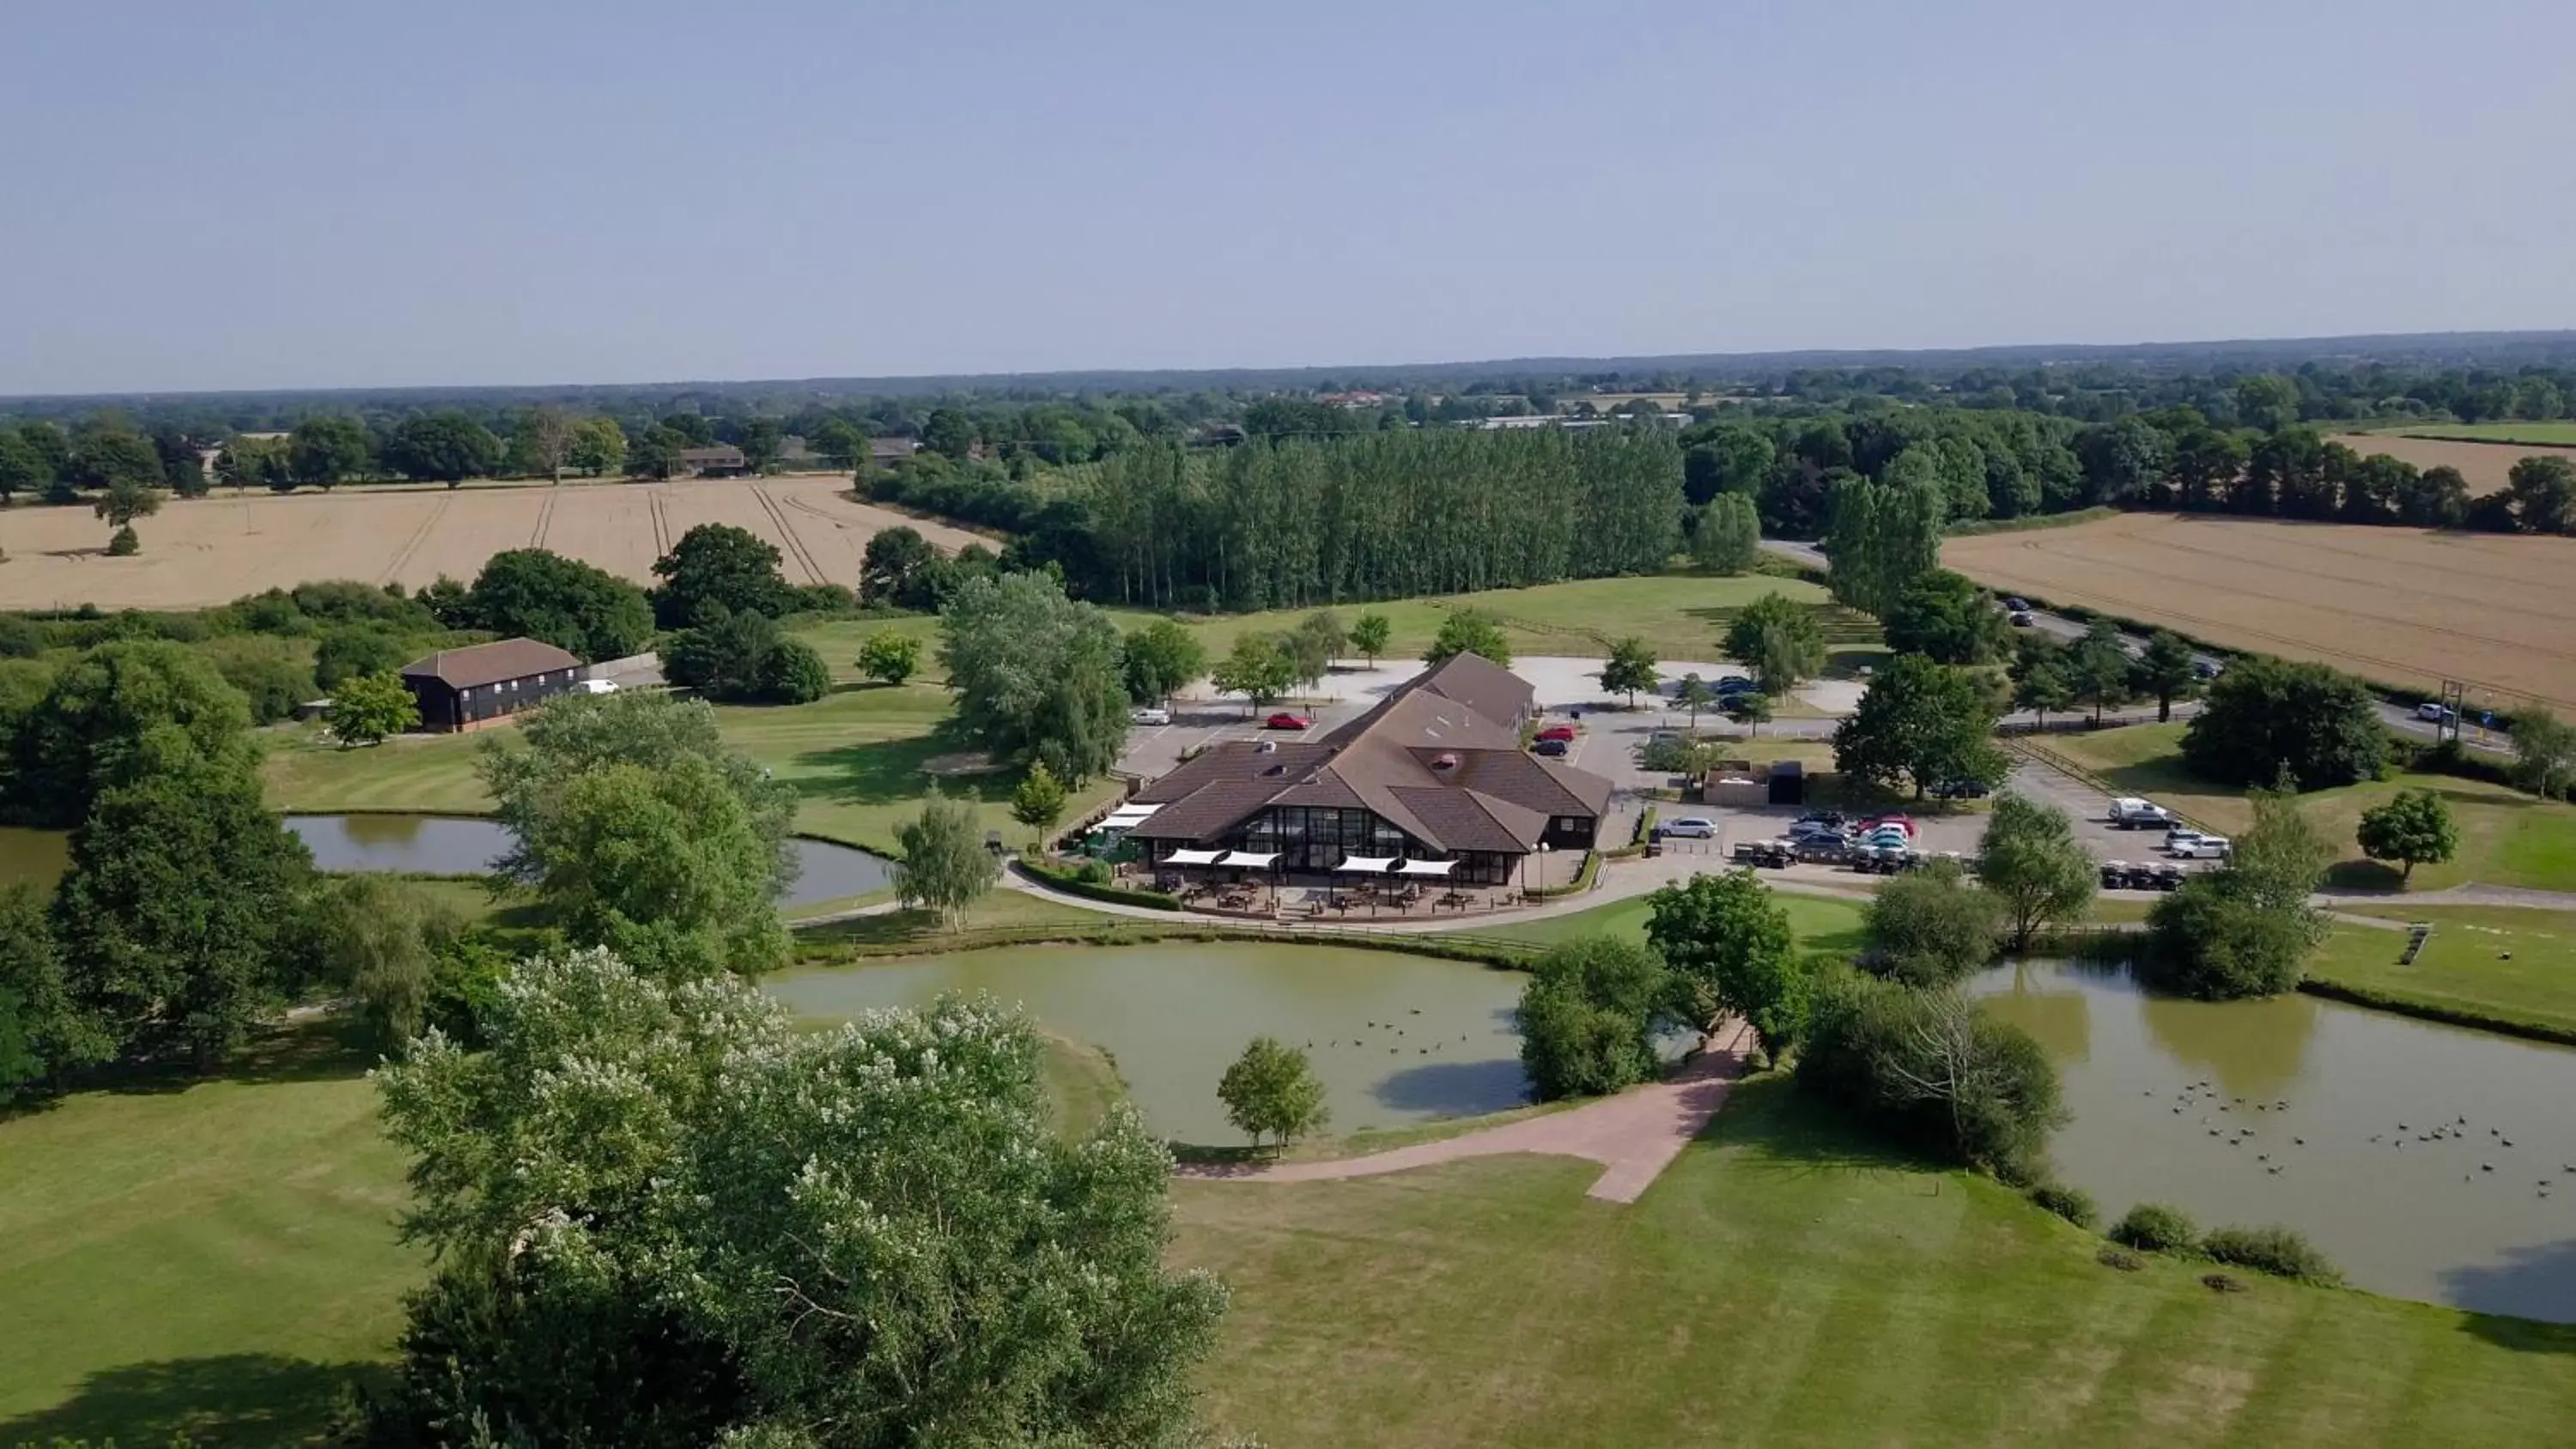 Bird's eye view in Weald of Kent Golf Course and Hotel